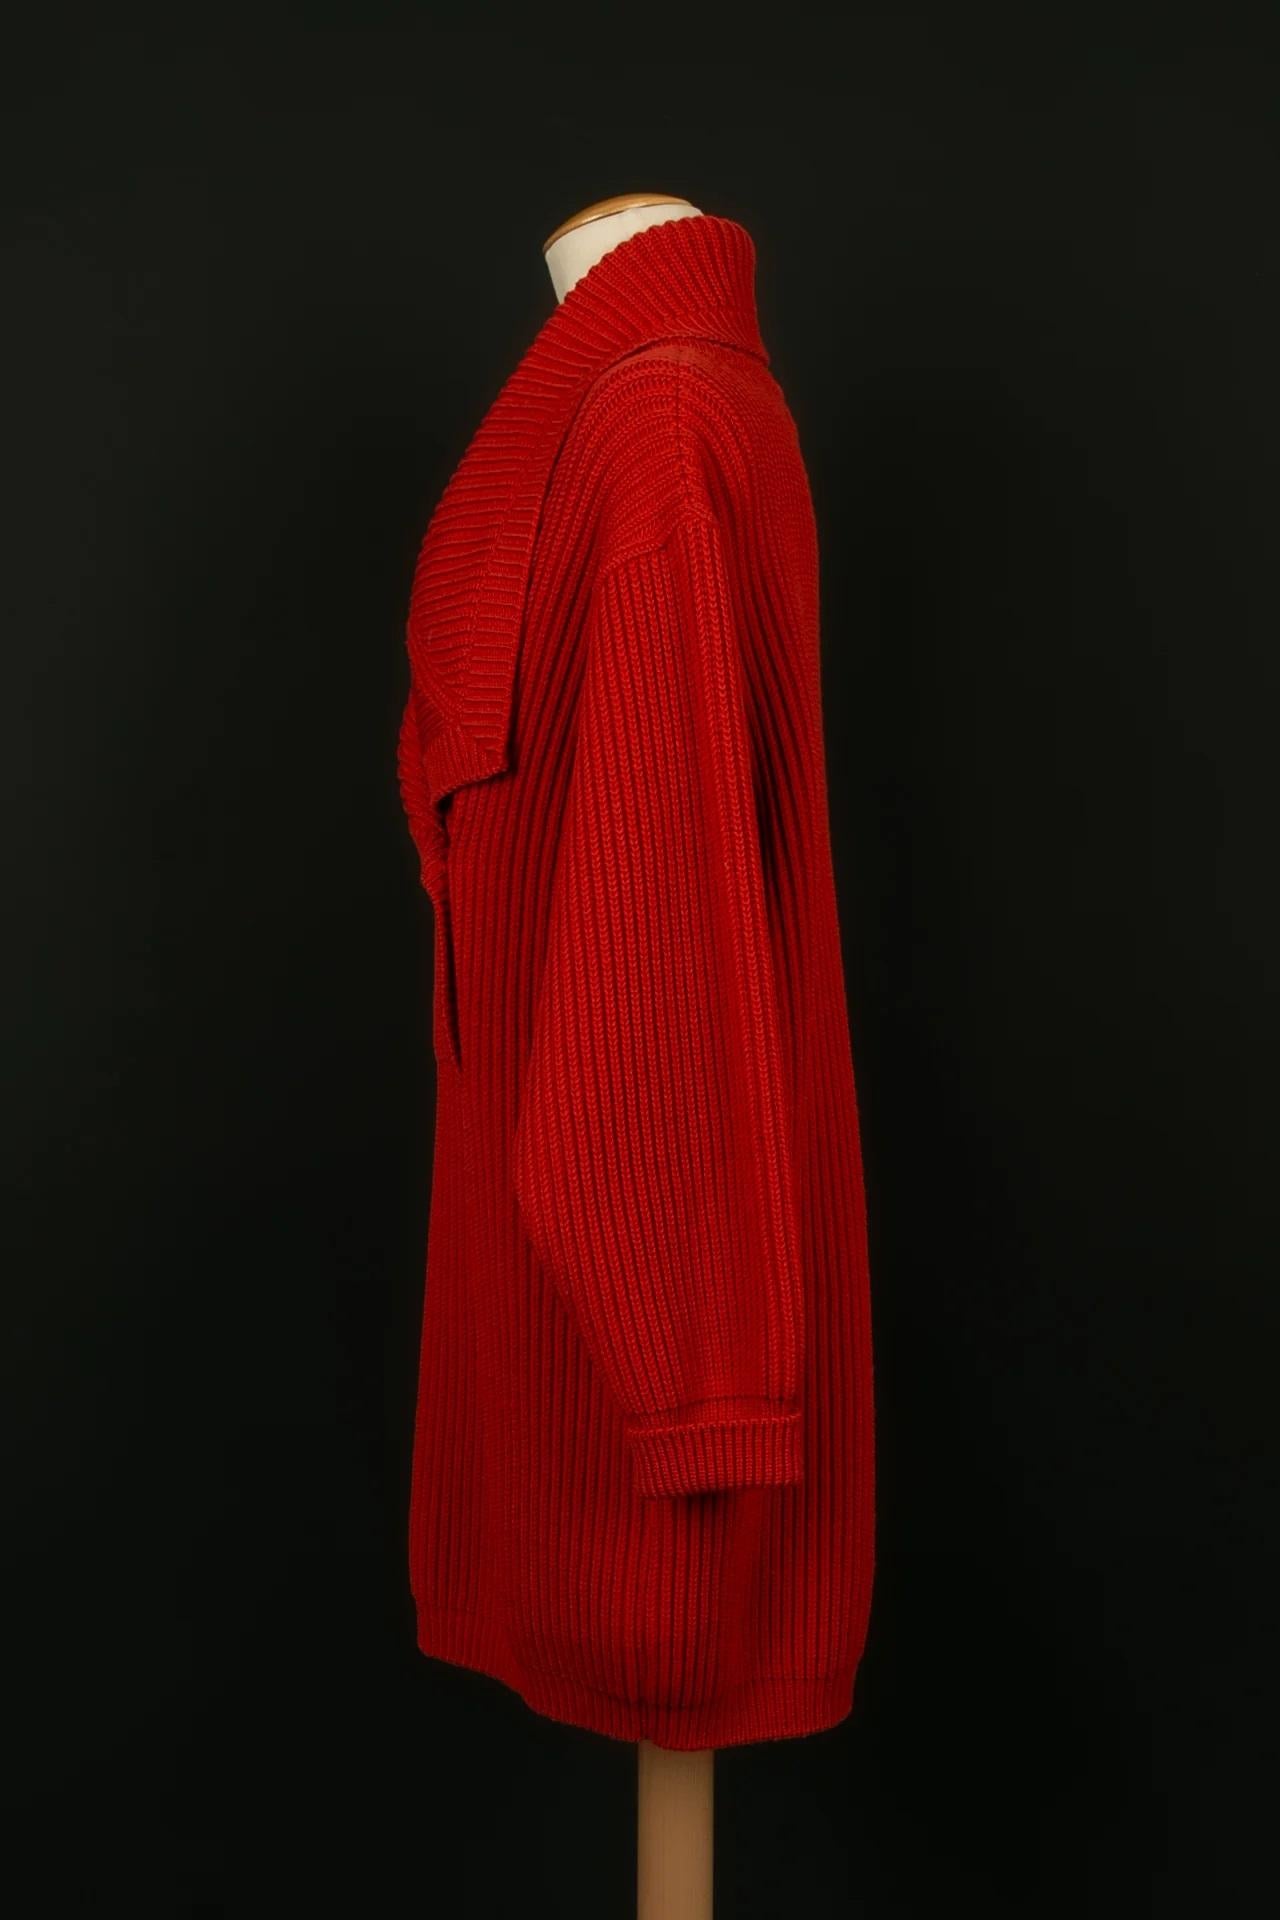 Lagerfeld - (Made in Italy) Orange red wool sweater. Size 40FR

Additional information:

Dimensions: Shoulder width: 43 cm 
Sleeve length: 55 cm 
Length: 83 cm

Condition: 
Very good condition

Seller Ref number: FH131